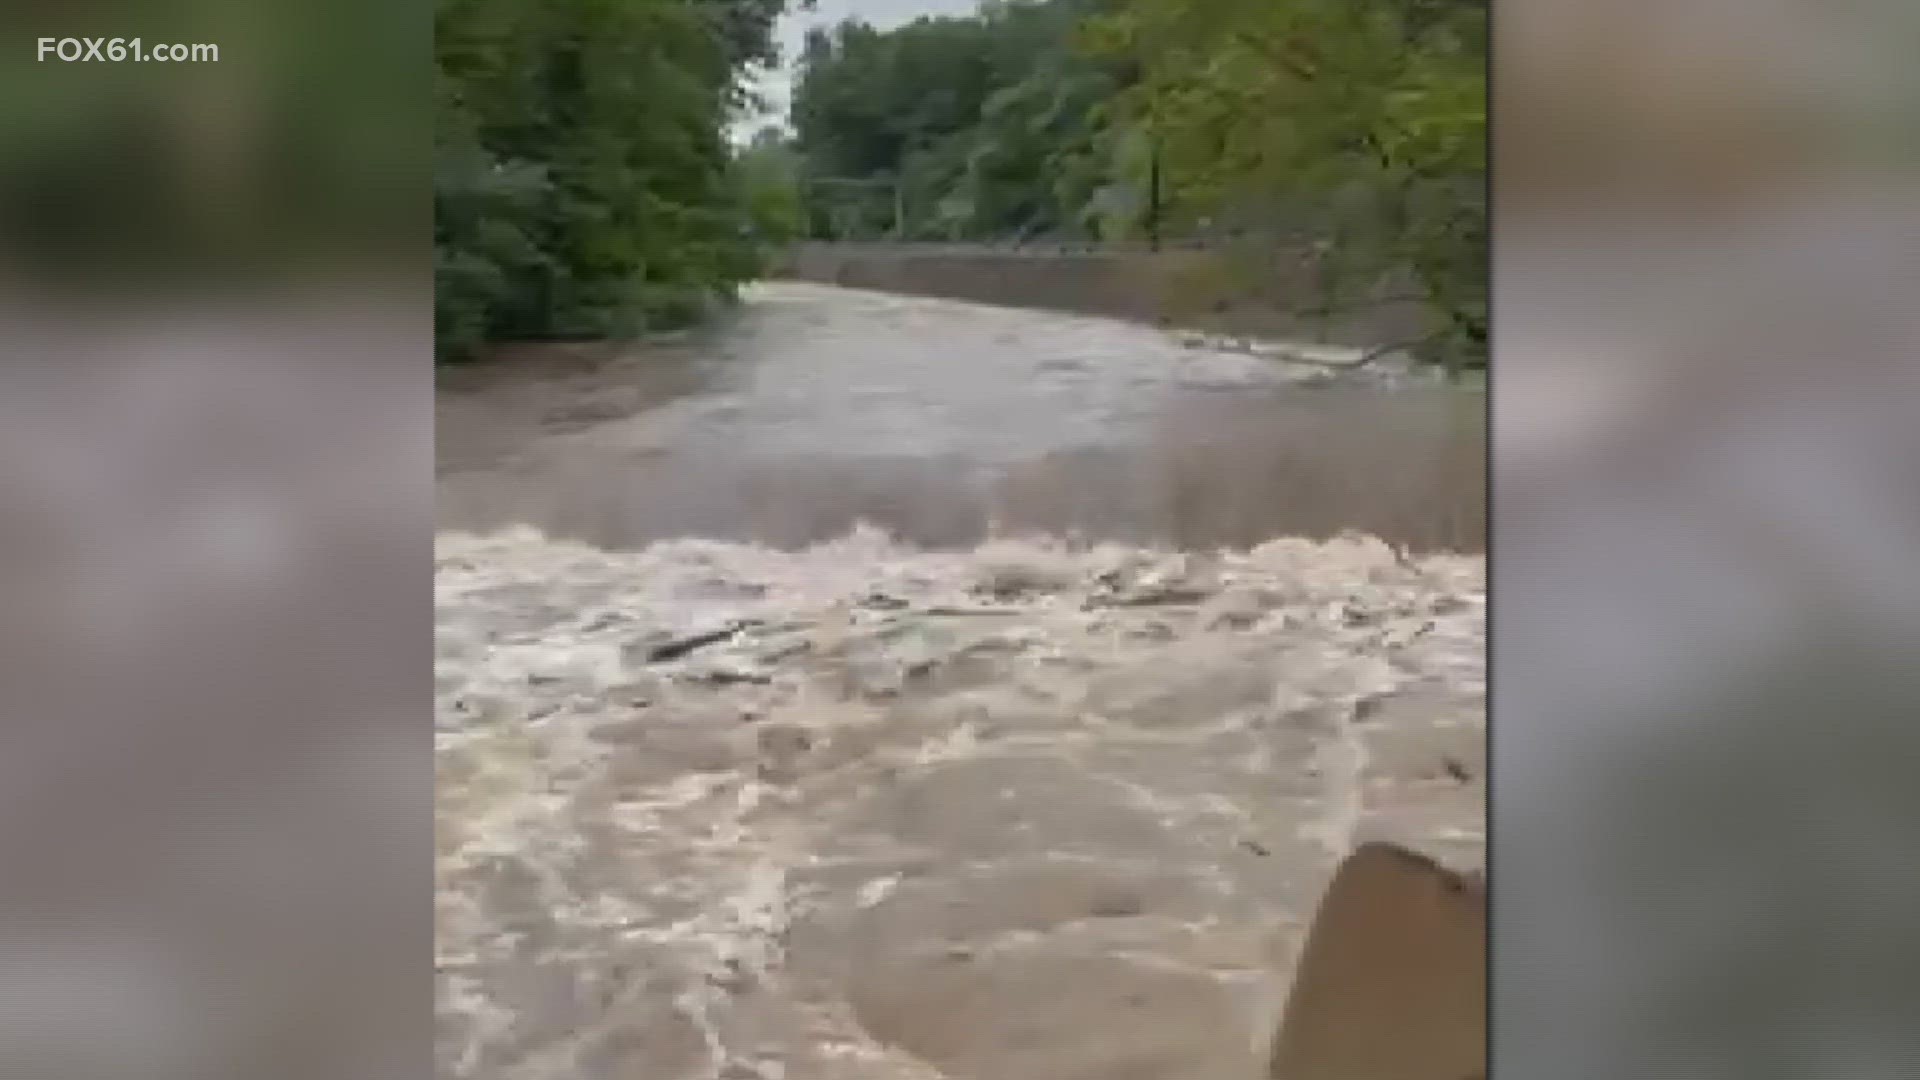 Many streets in Connecticut had to be closed due to the heavy rain on Wednesday.